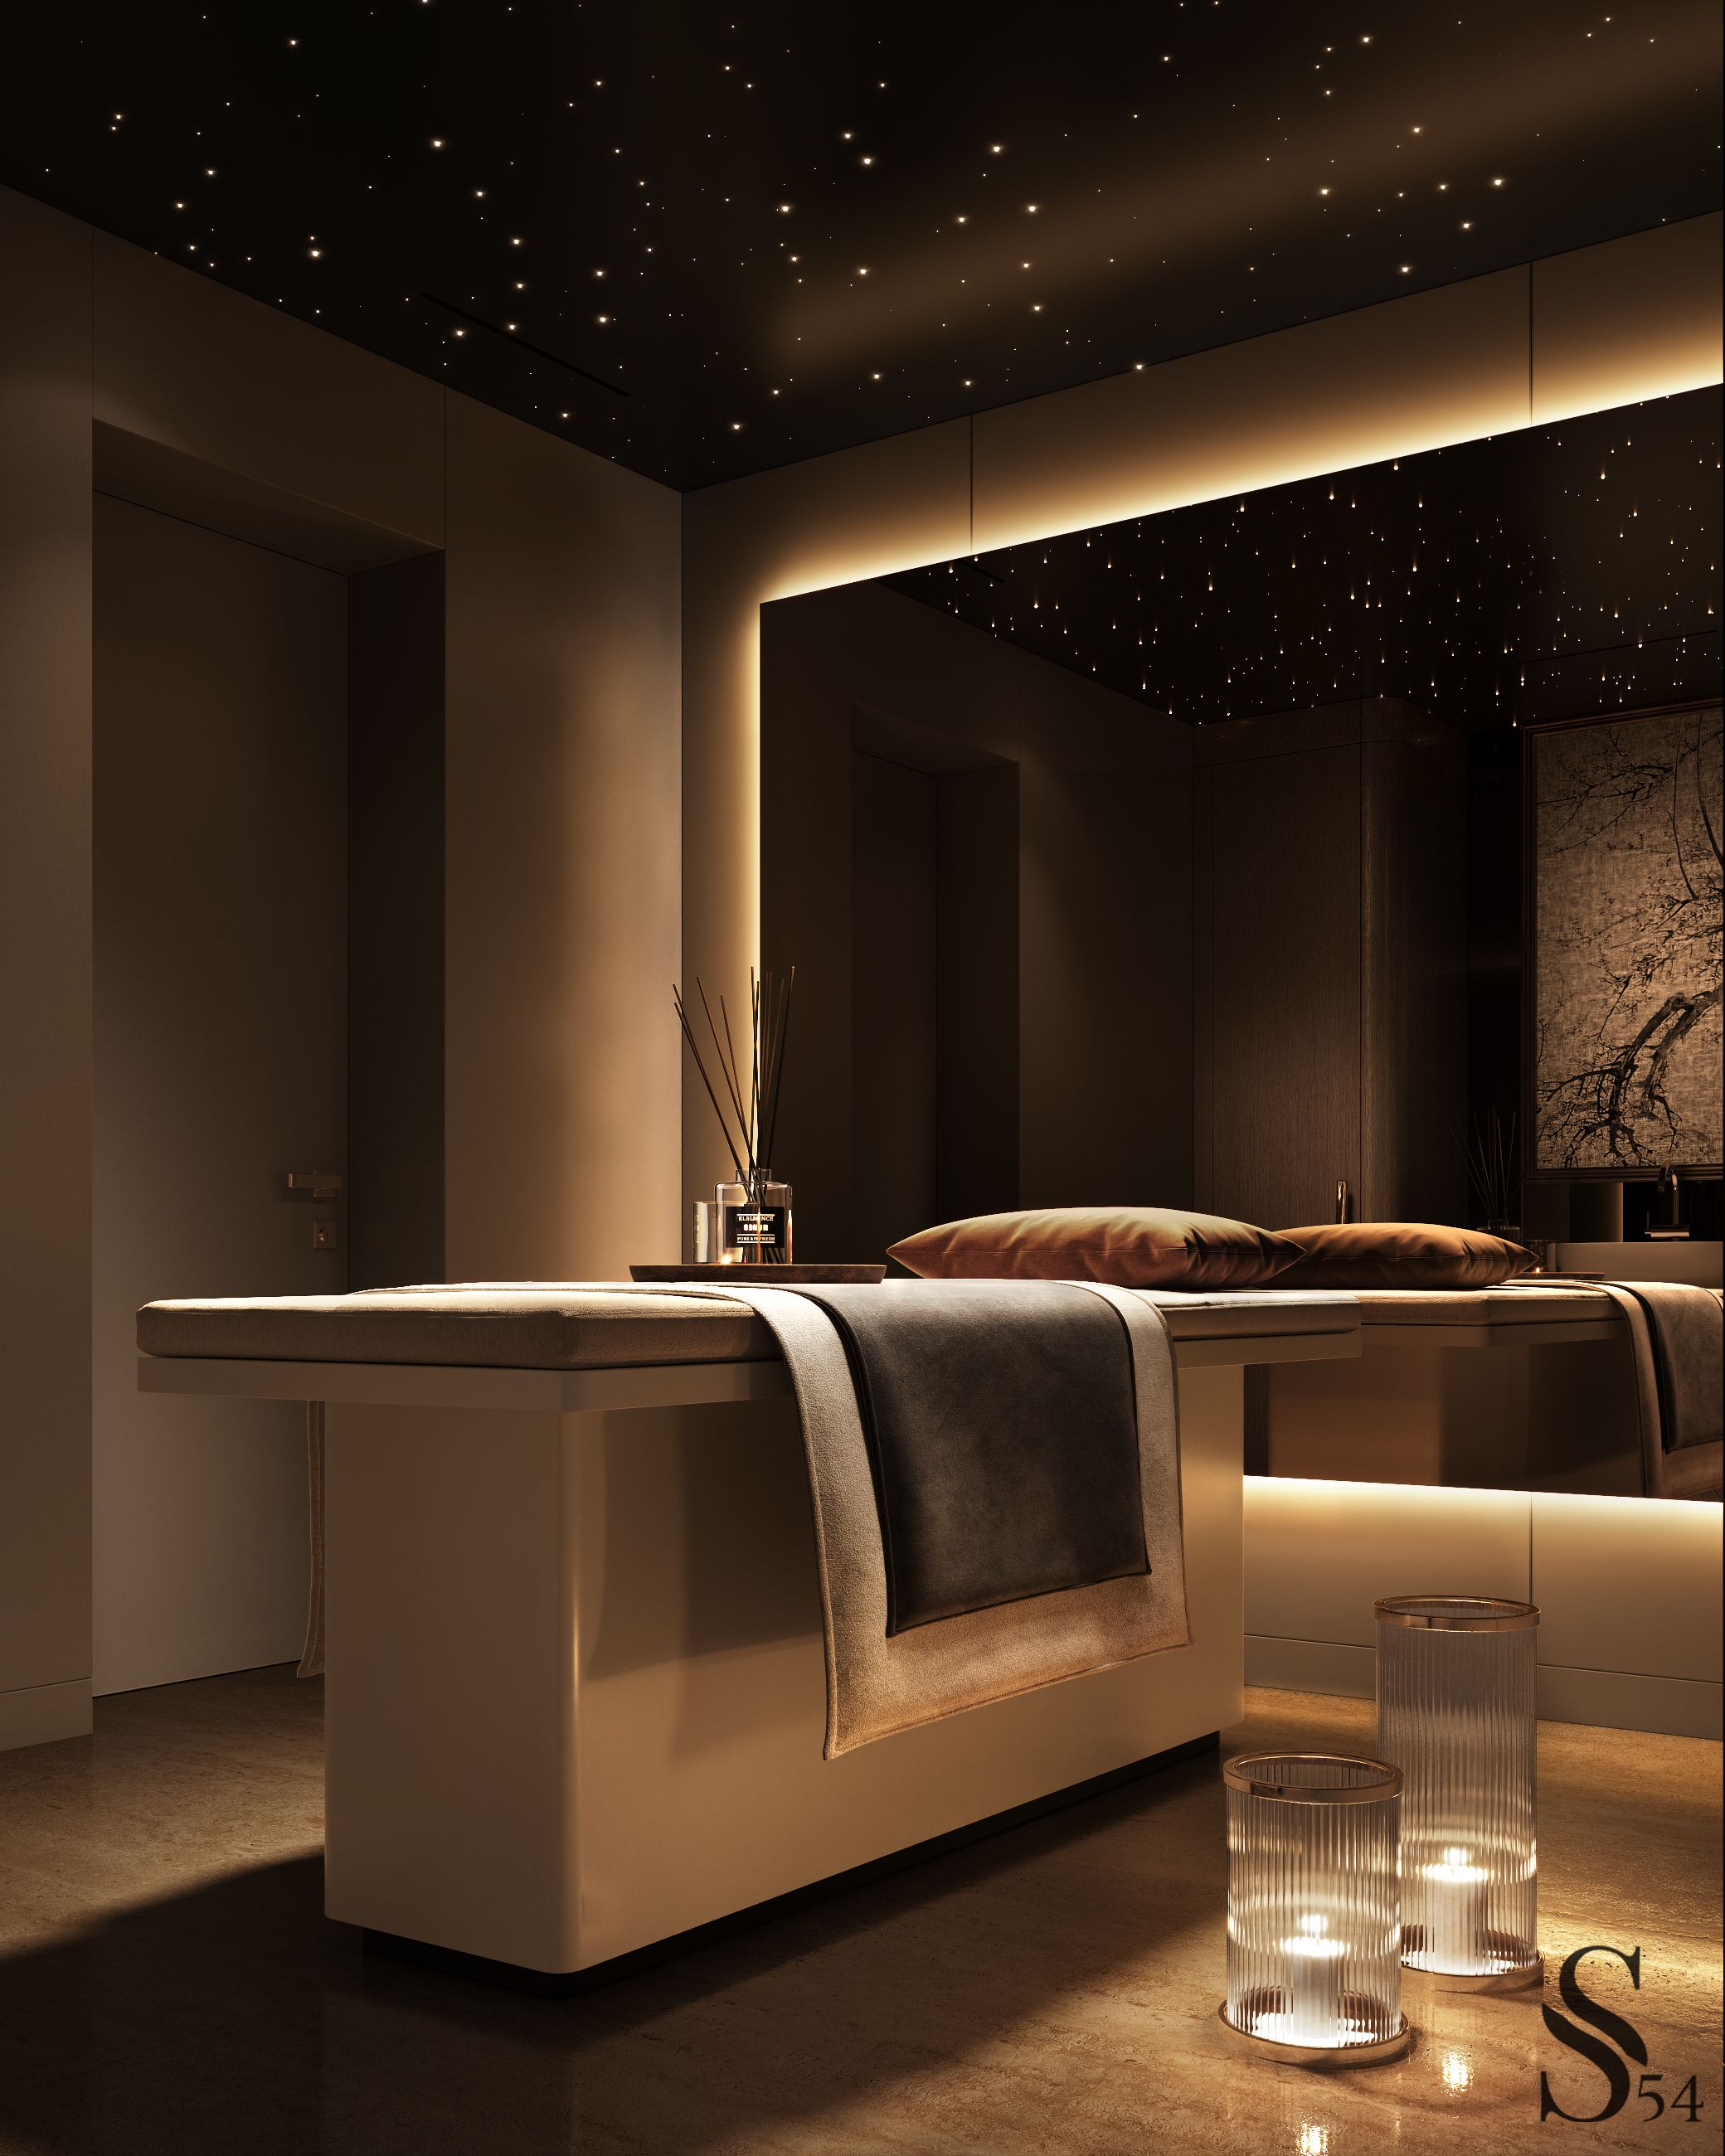 The spa area is designed to be maximally enclosed and intimate
